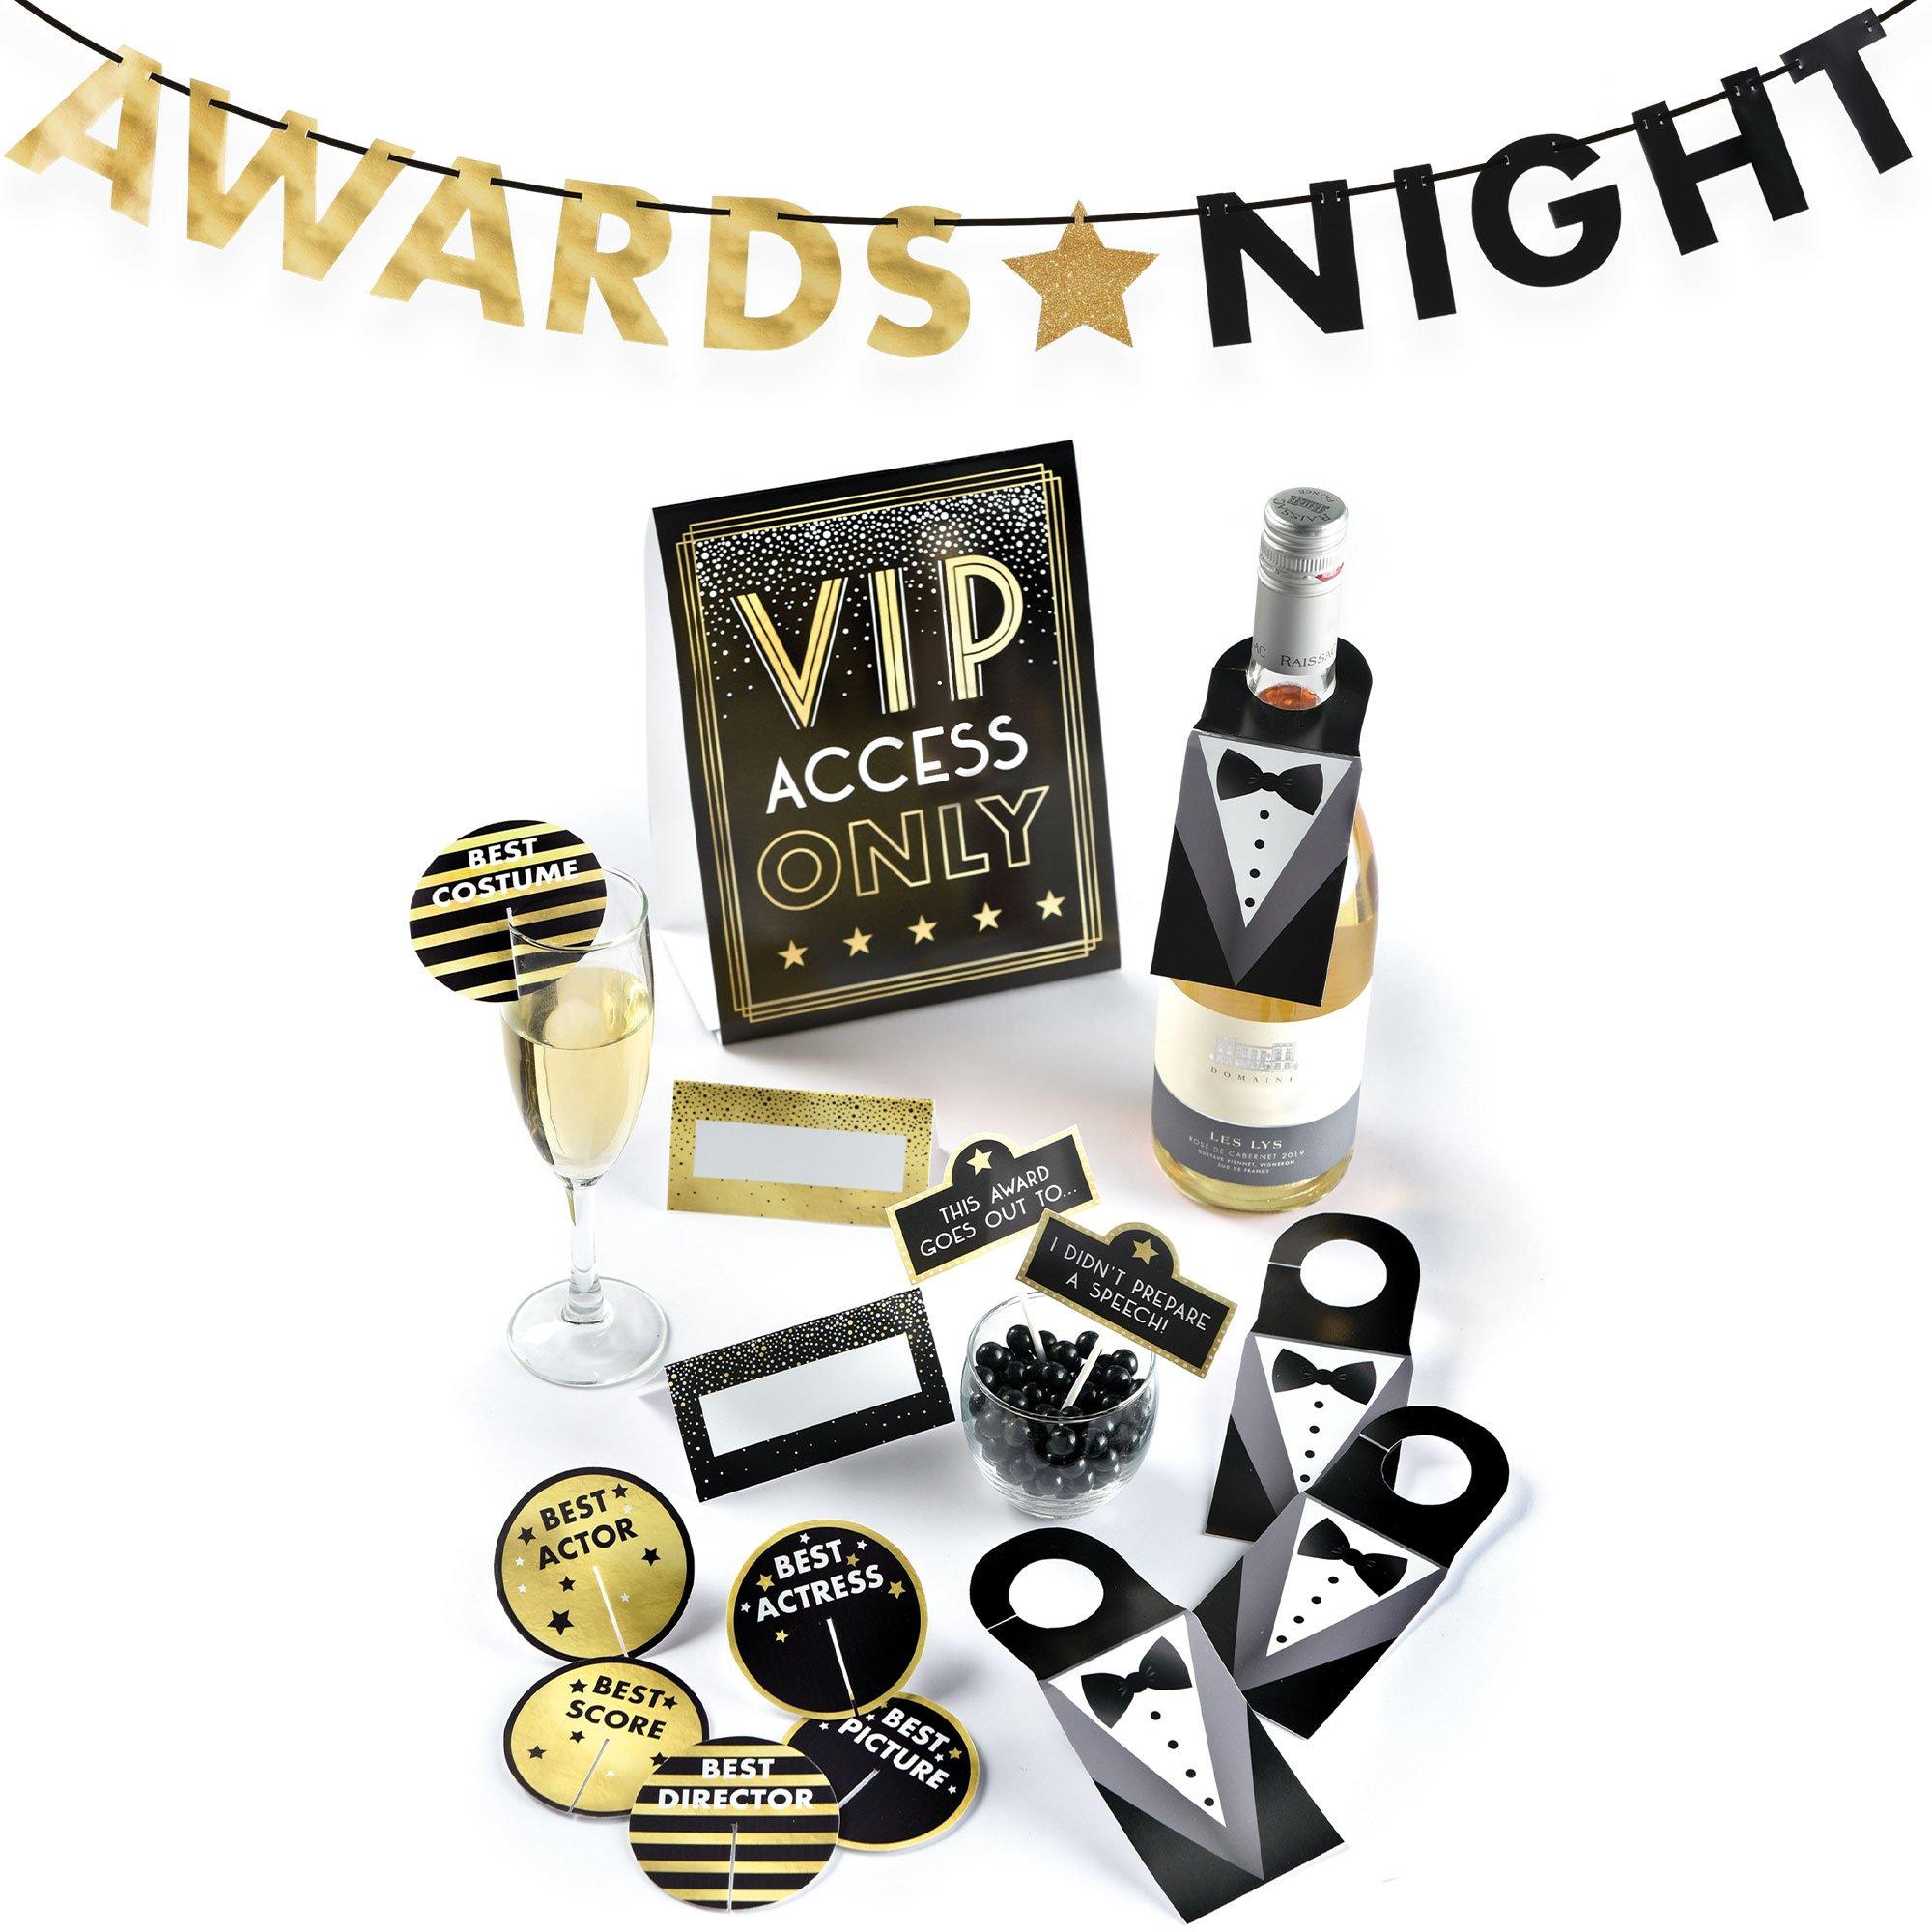 Hollywood & Awards Night Decorations: Party at Lewis Elegant Party  Supplies, Plastic Dinnerware, Paper Plates and Napkins